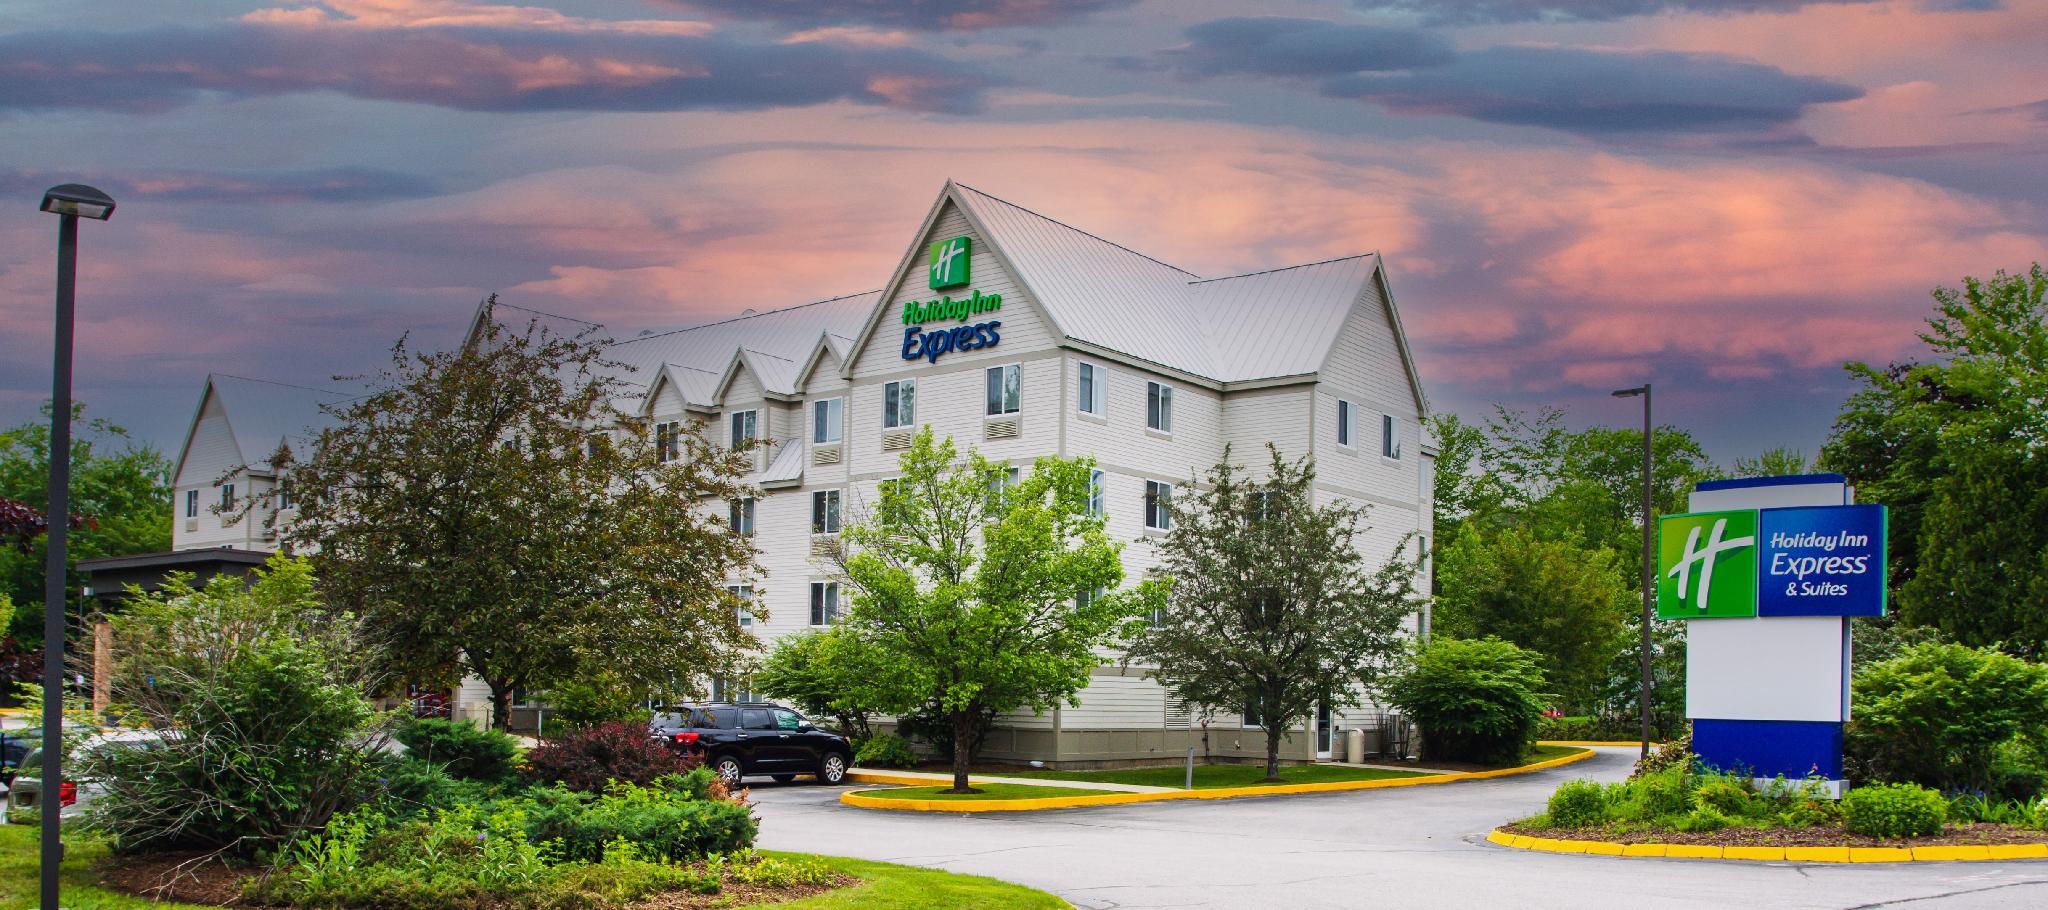 Holiday Inn Express & Suites Lincoln East - White Mountains - Waterville Valley, NH